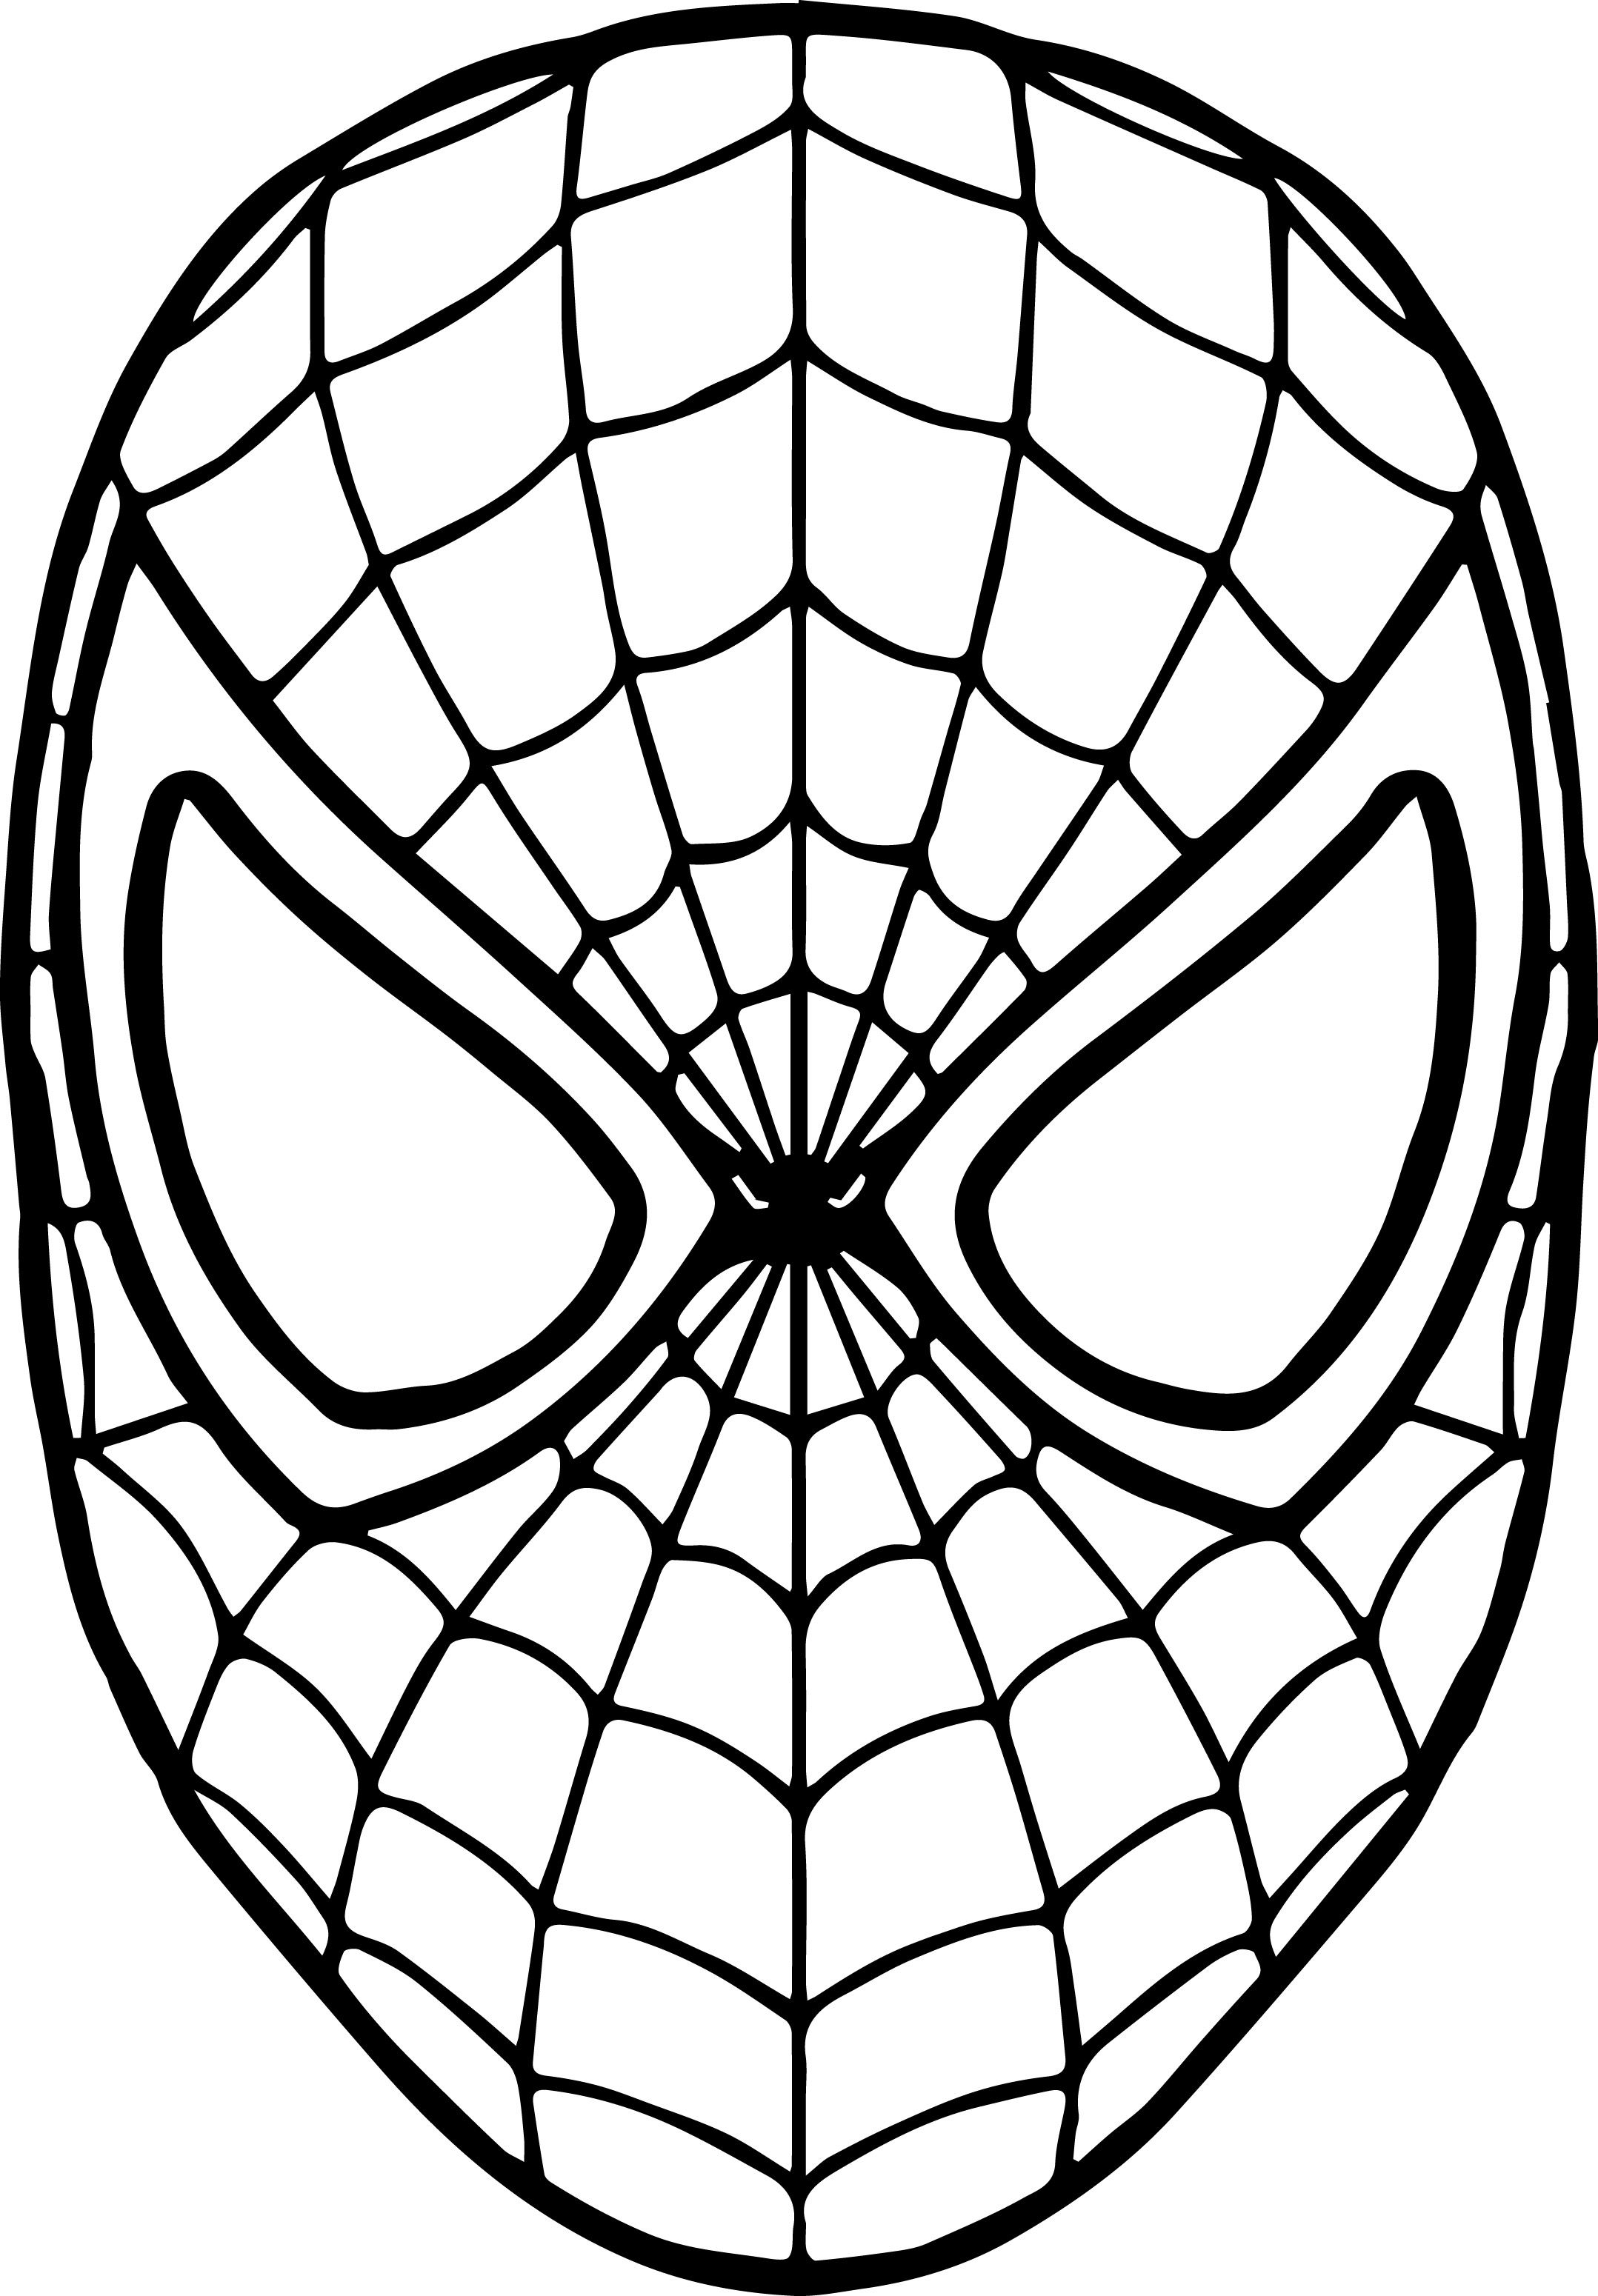 Spiderman Mask Coloring Page at GetDrawings Free download